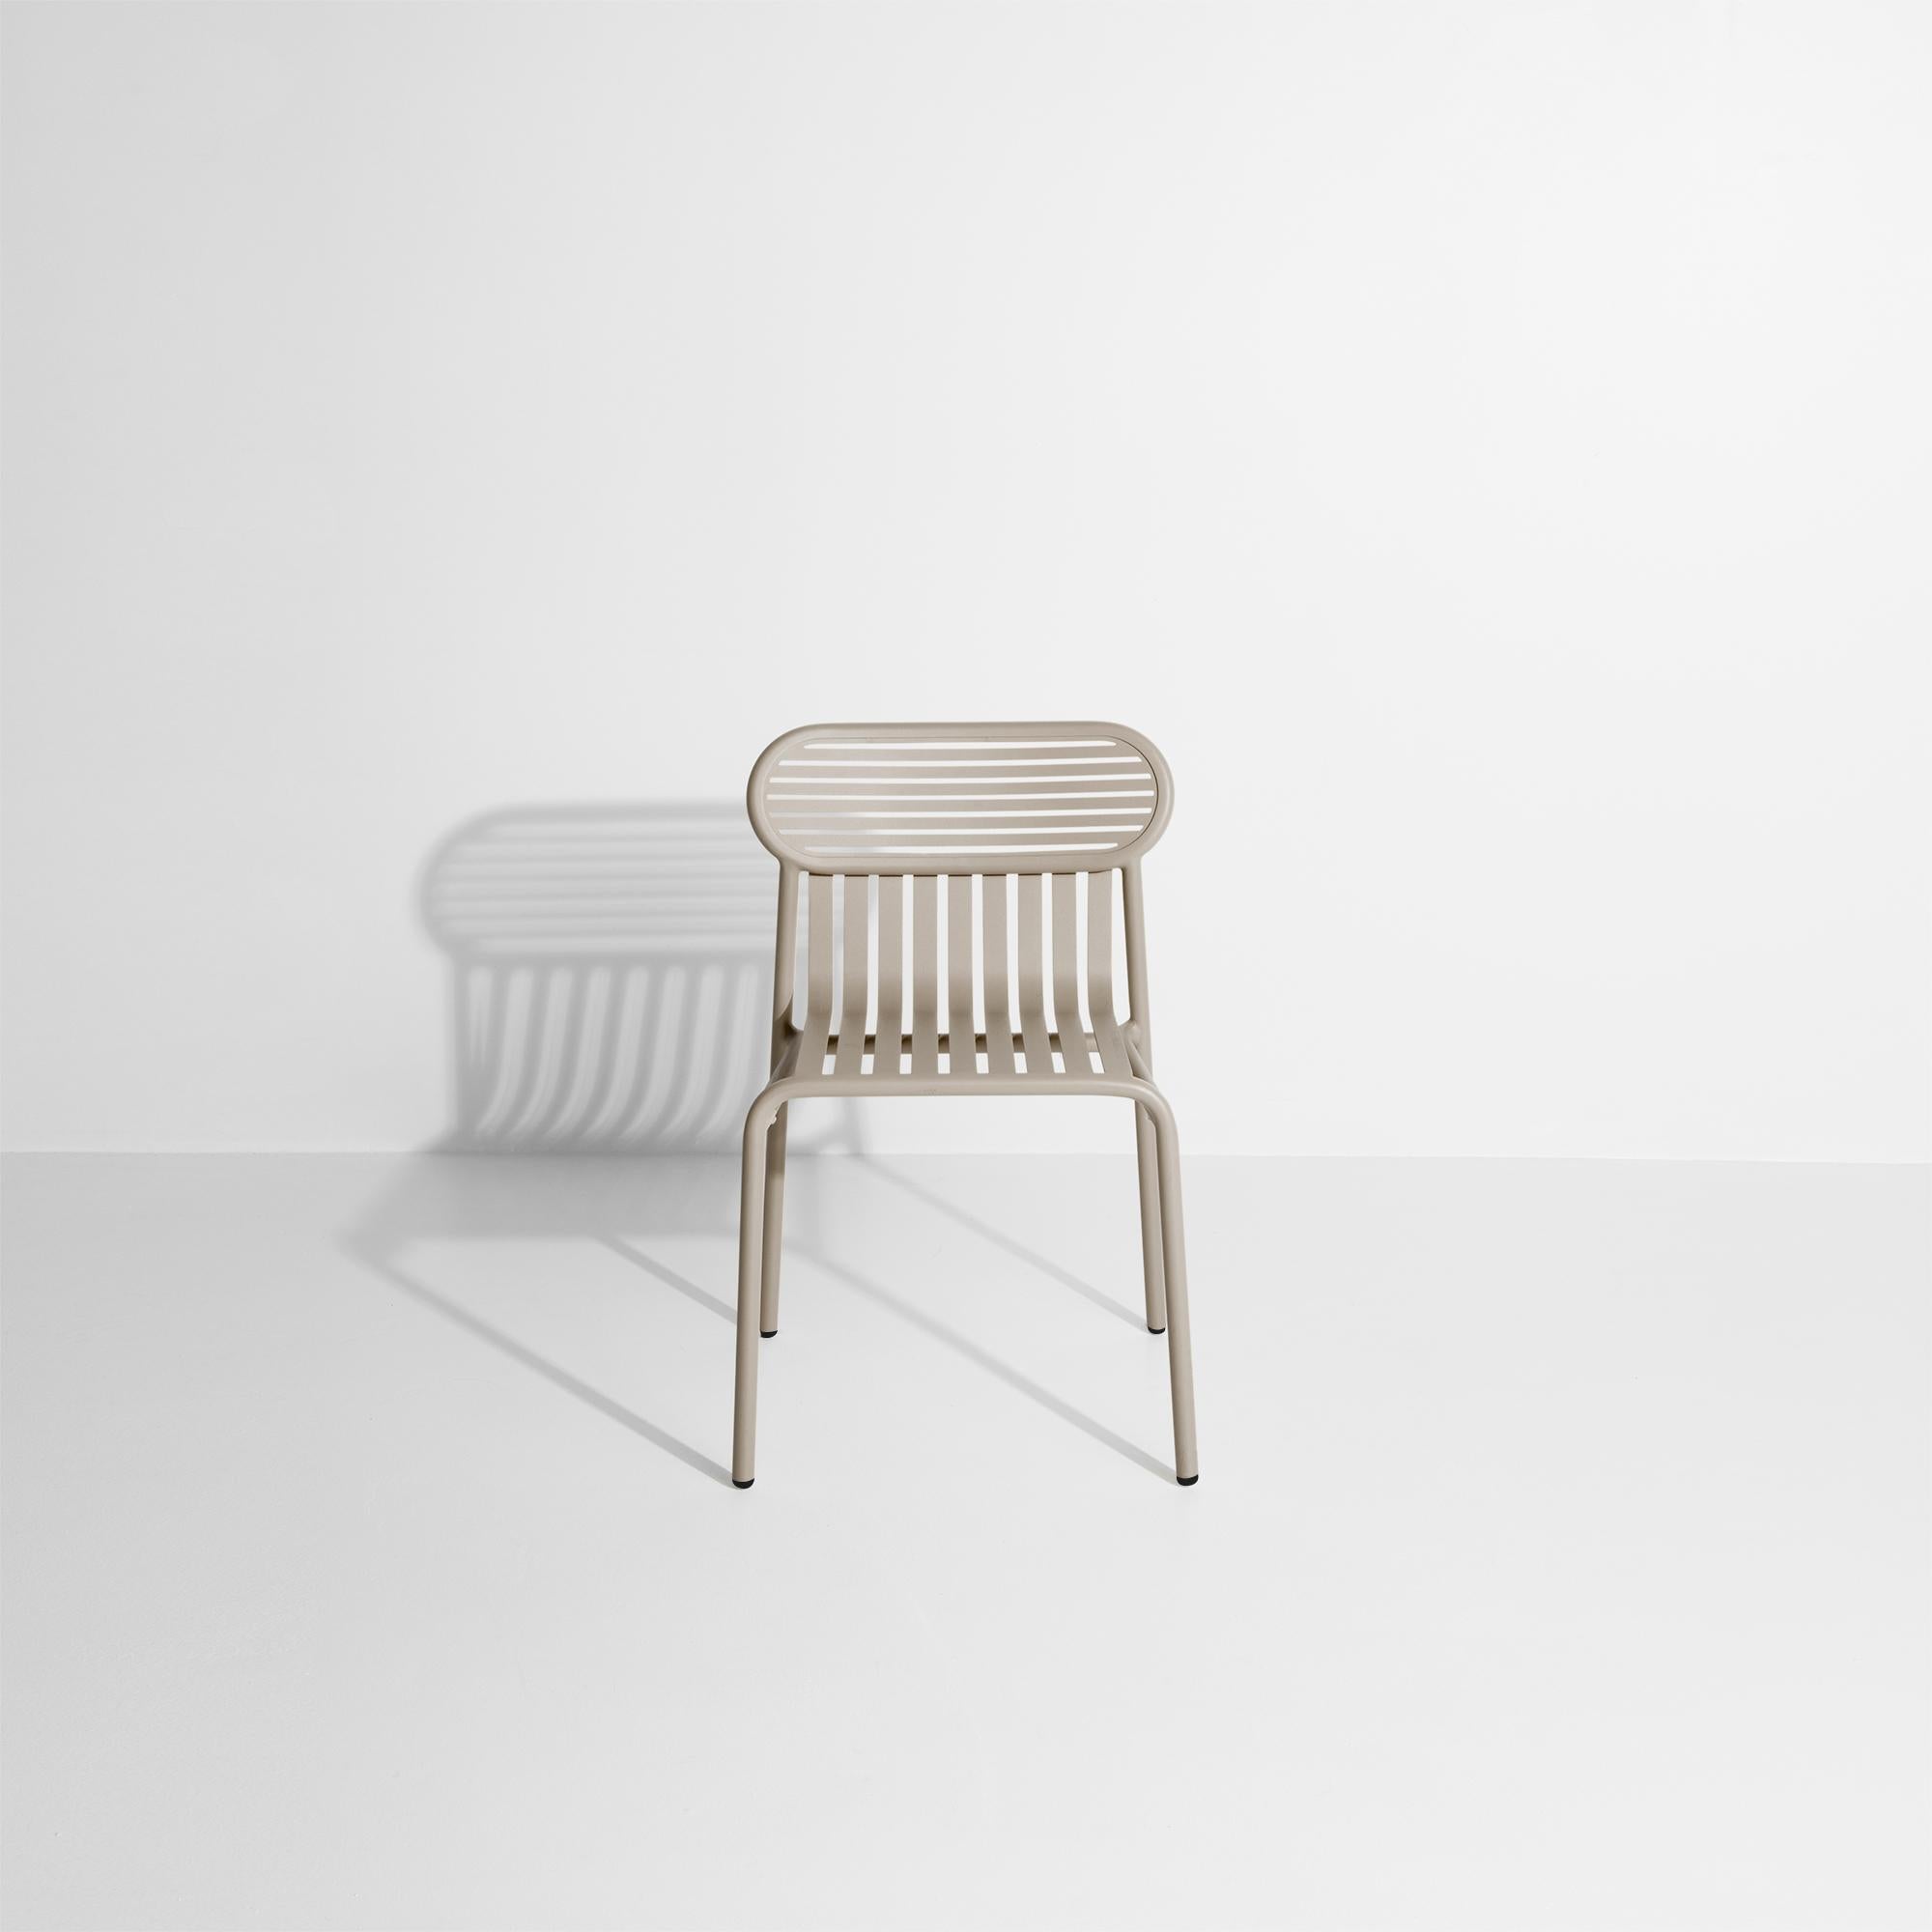 Petite Friture Week-End Chair in Dune Aluminium by Studio BrichetZiegler In New Condition For Sale In Brooklyn, NY